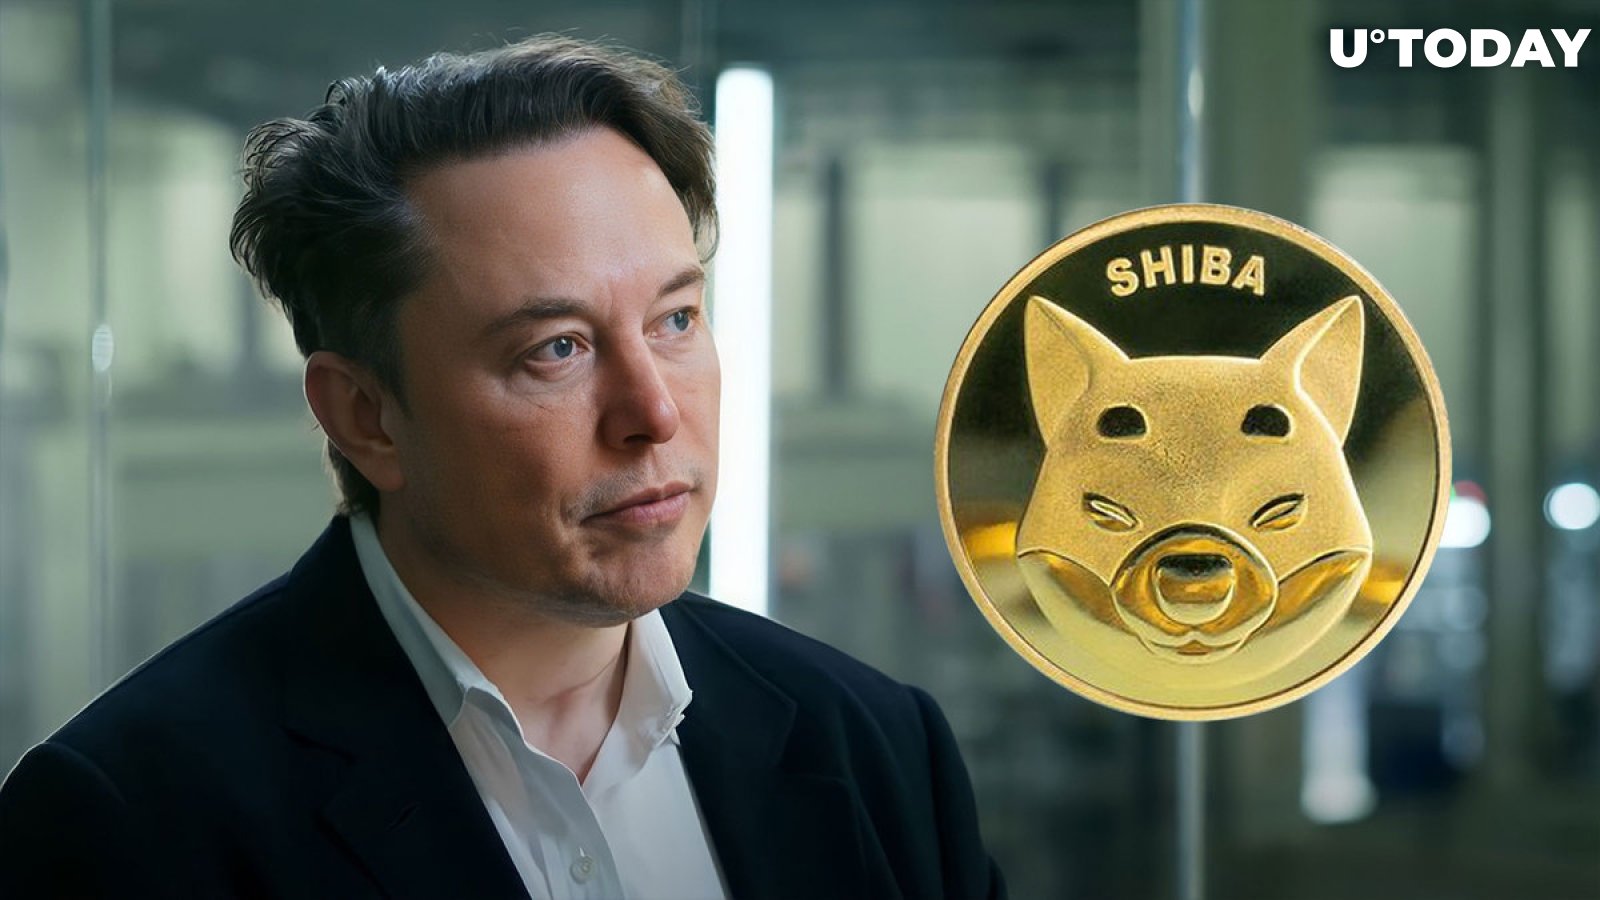 Shibburn Calls Elon Musk to Action, Here's What It's About